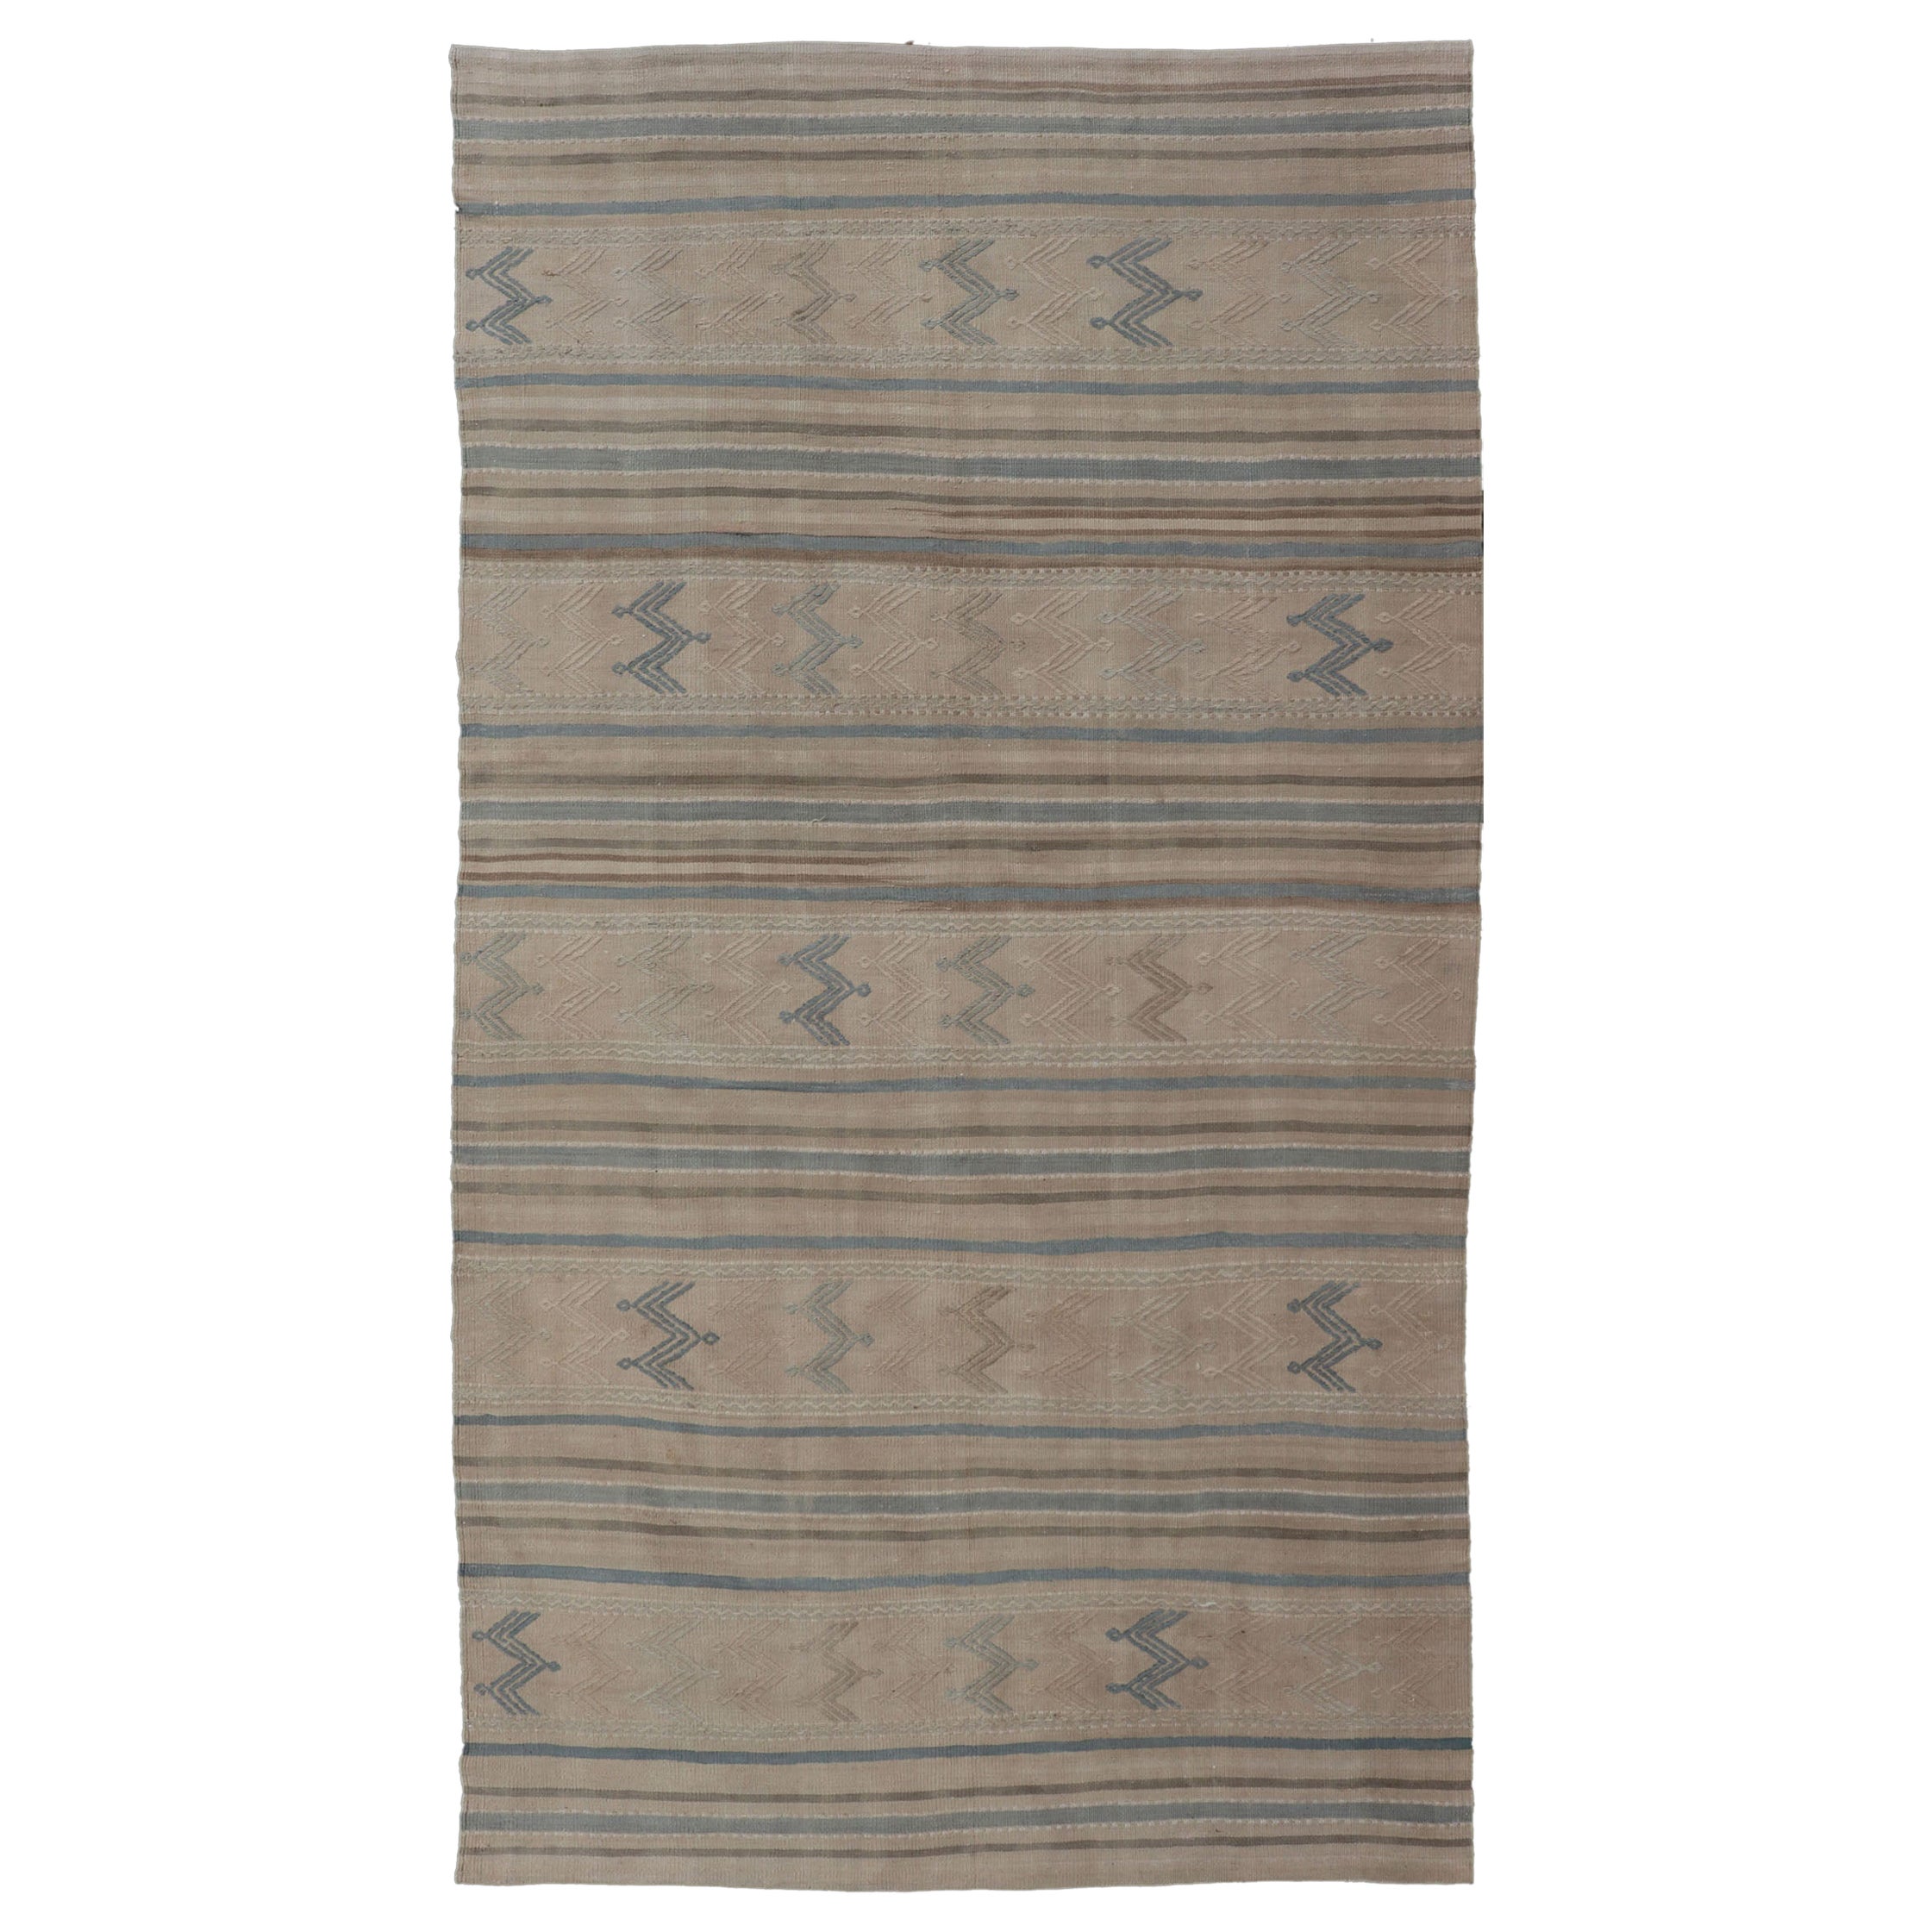 Turkish Vintage Kilim With Embroidered Motifs in Light Tan, Blue L. Brown